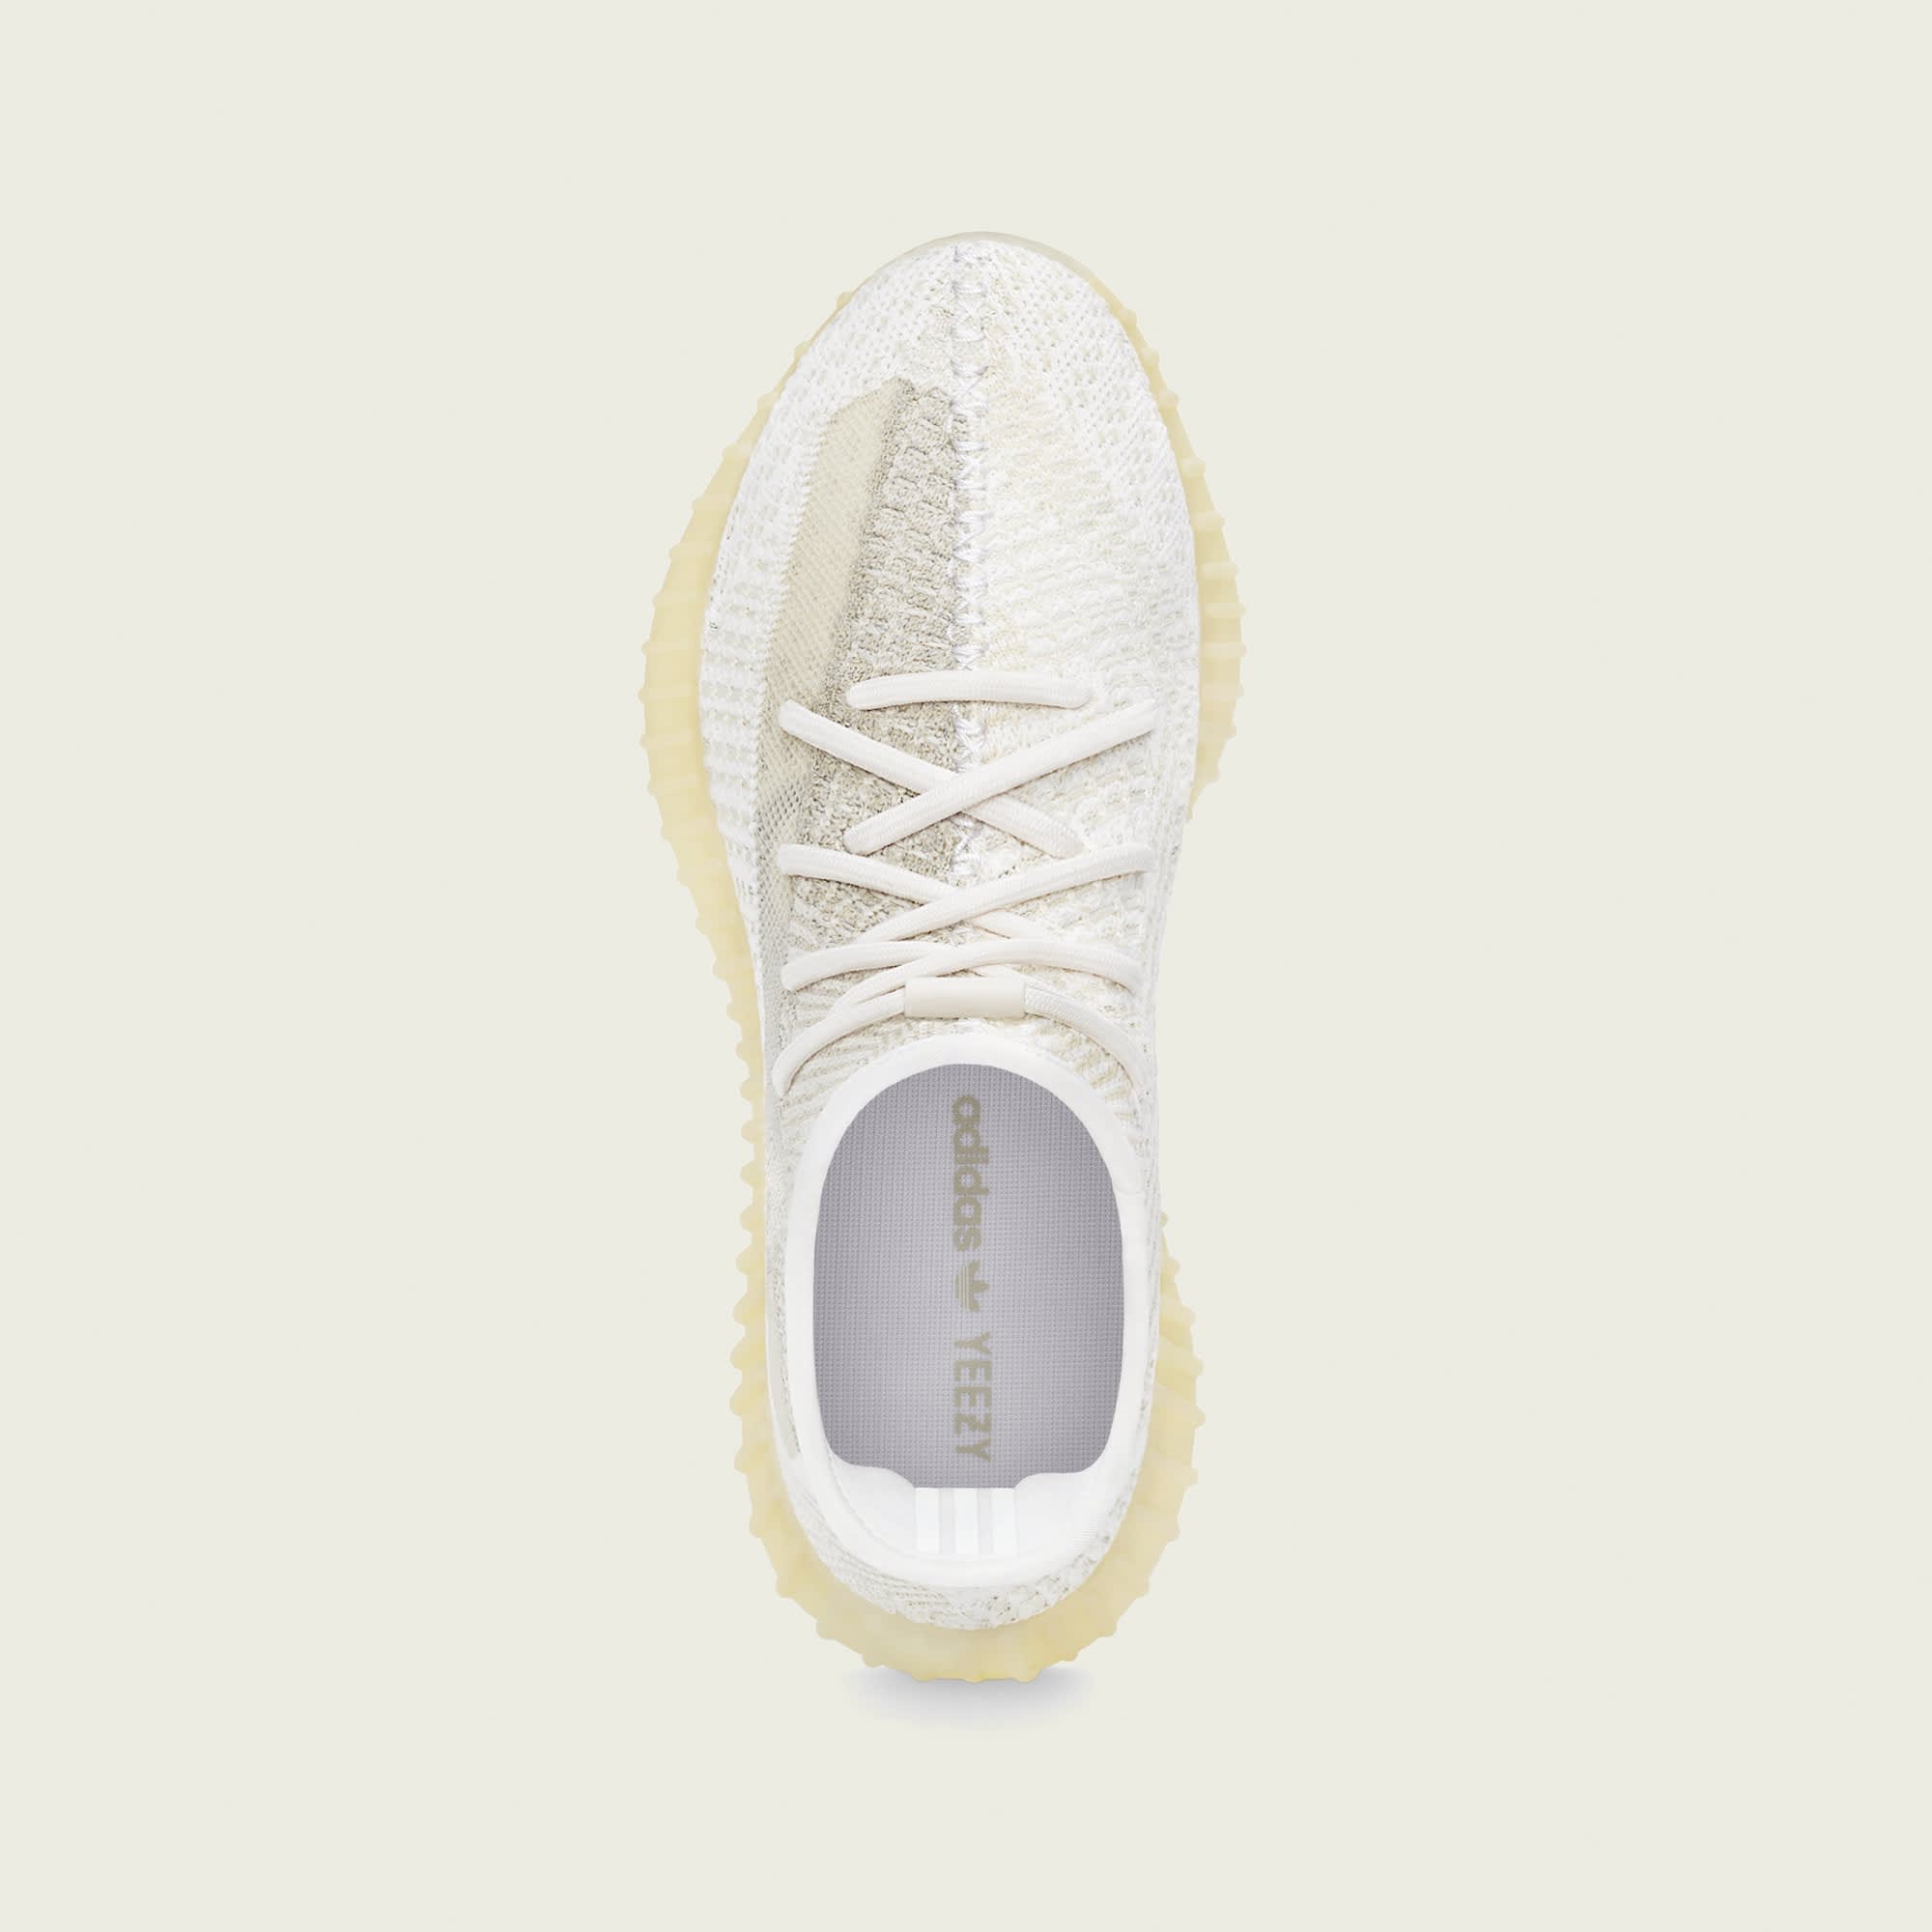 Adidas Yeezy Boost 350 V2 'Natural' Release Date FZ5246 | Sole Collector